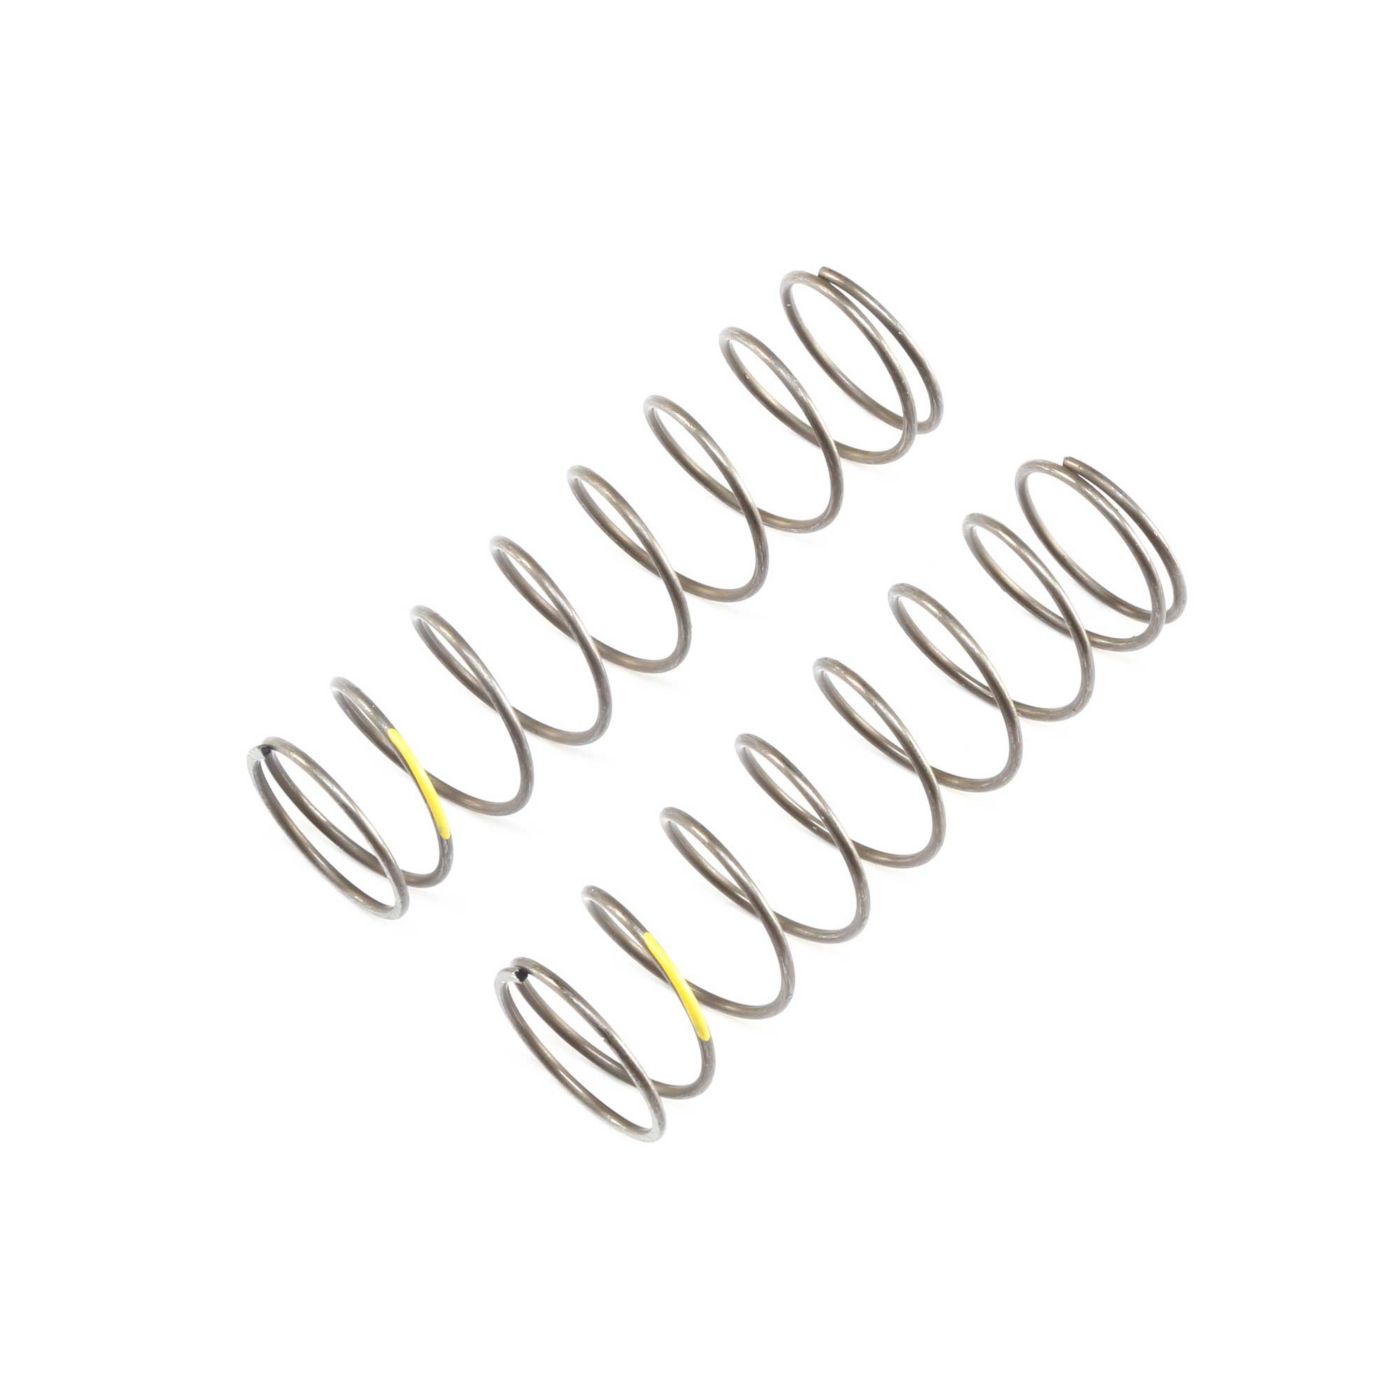 TLR 16mm EVO RR Shk Spring 4.2 Rate Yellow(2):8B 4.0 TLR344025